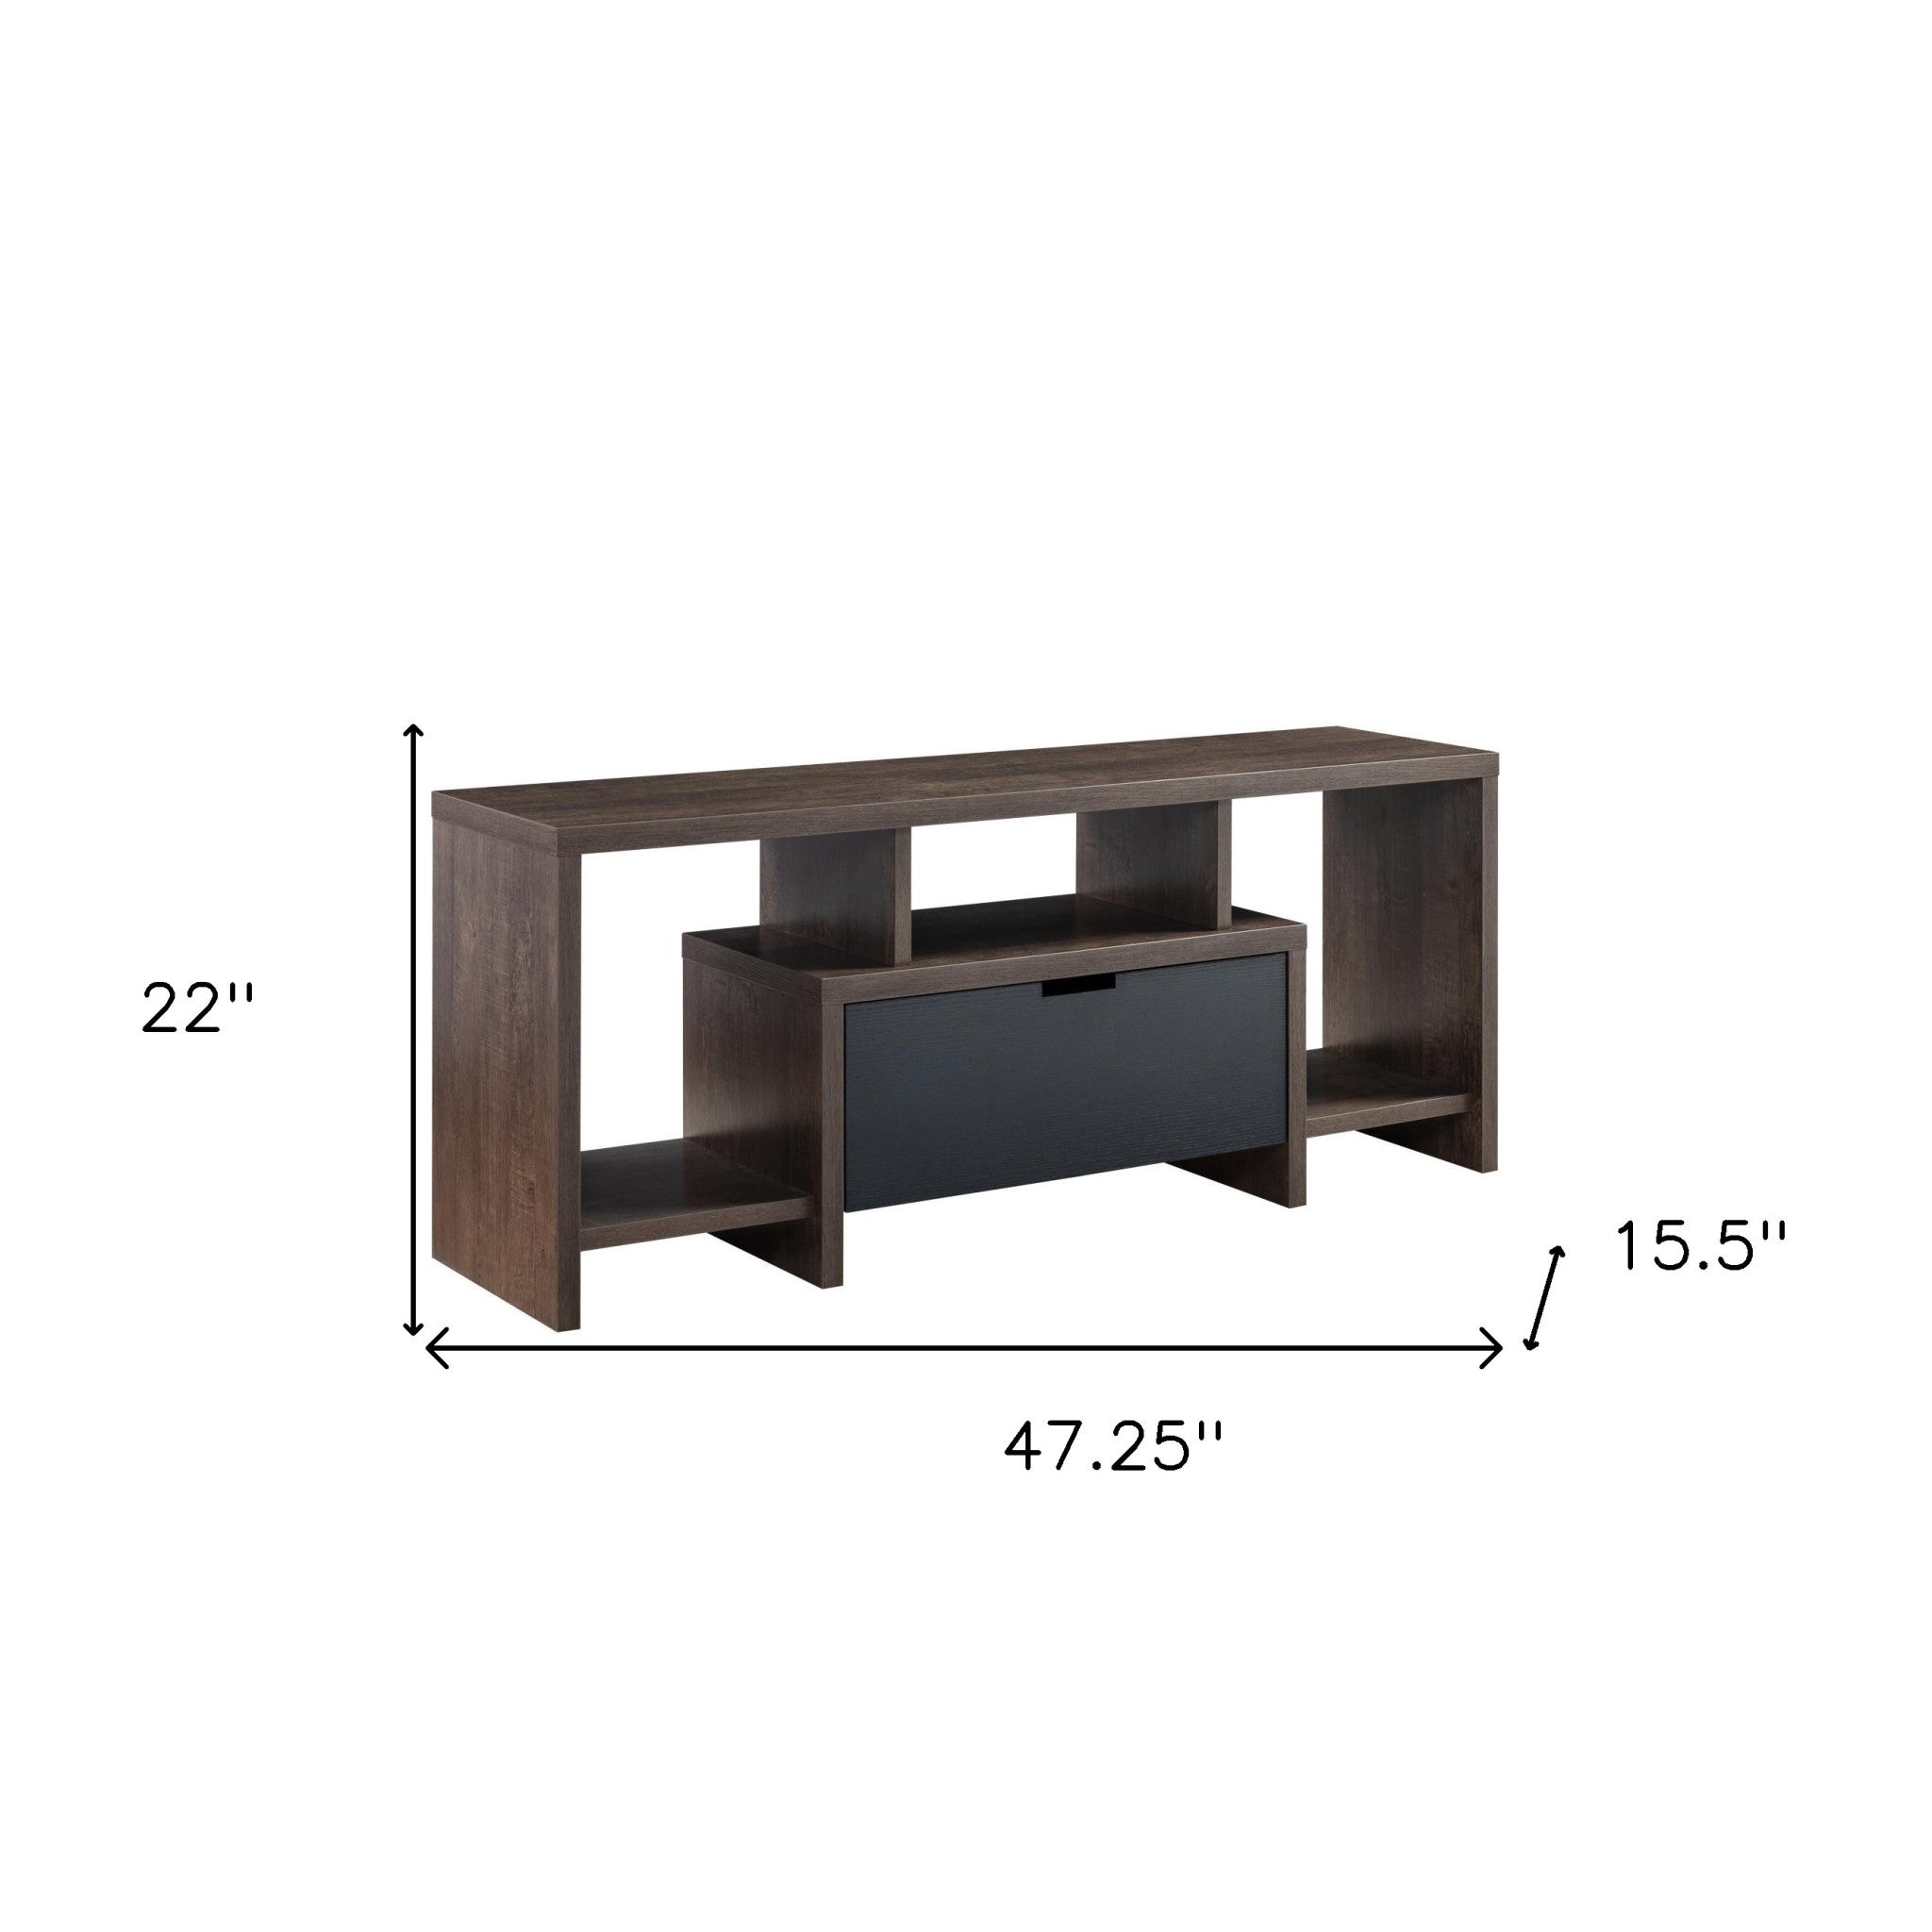 47" Walnut Oak And Black Manufactured Wood Cabinet Enclosed Storage TV Stand